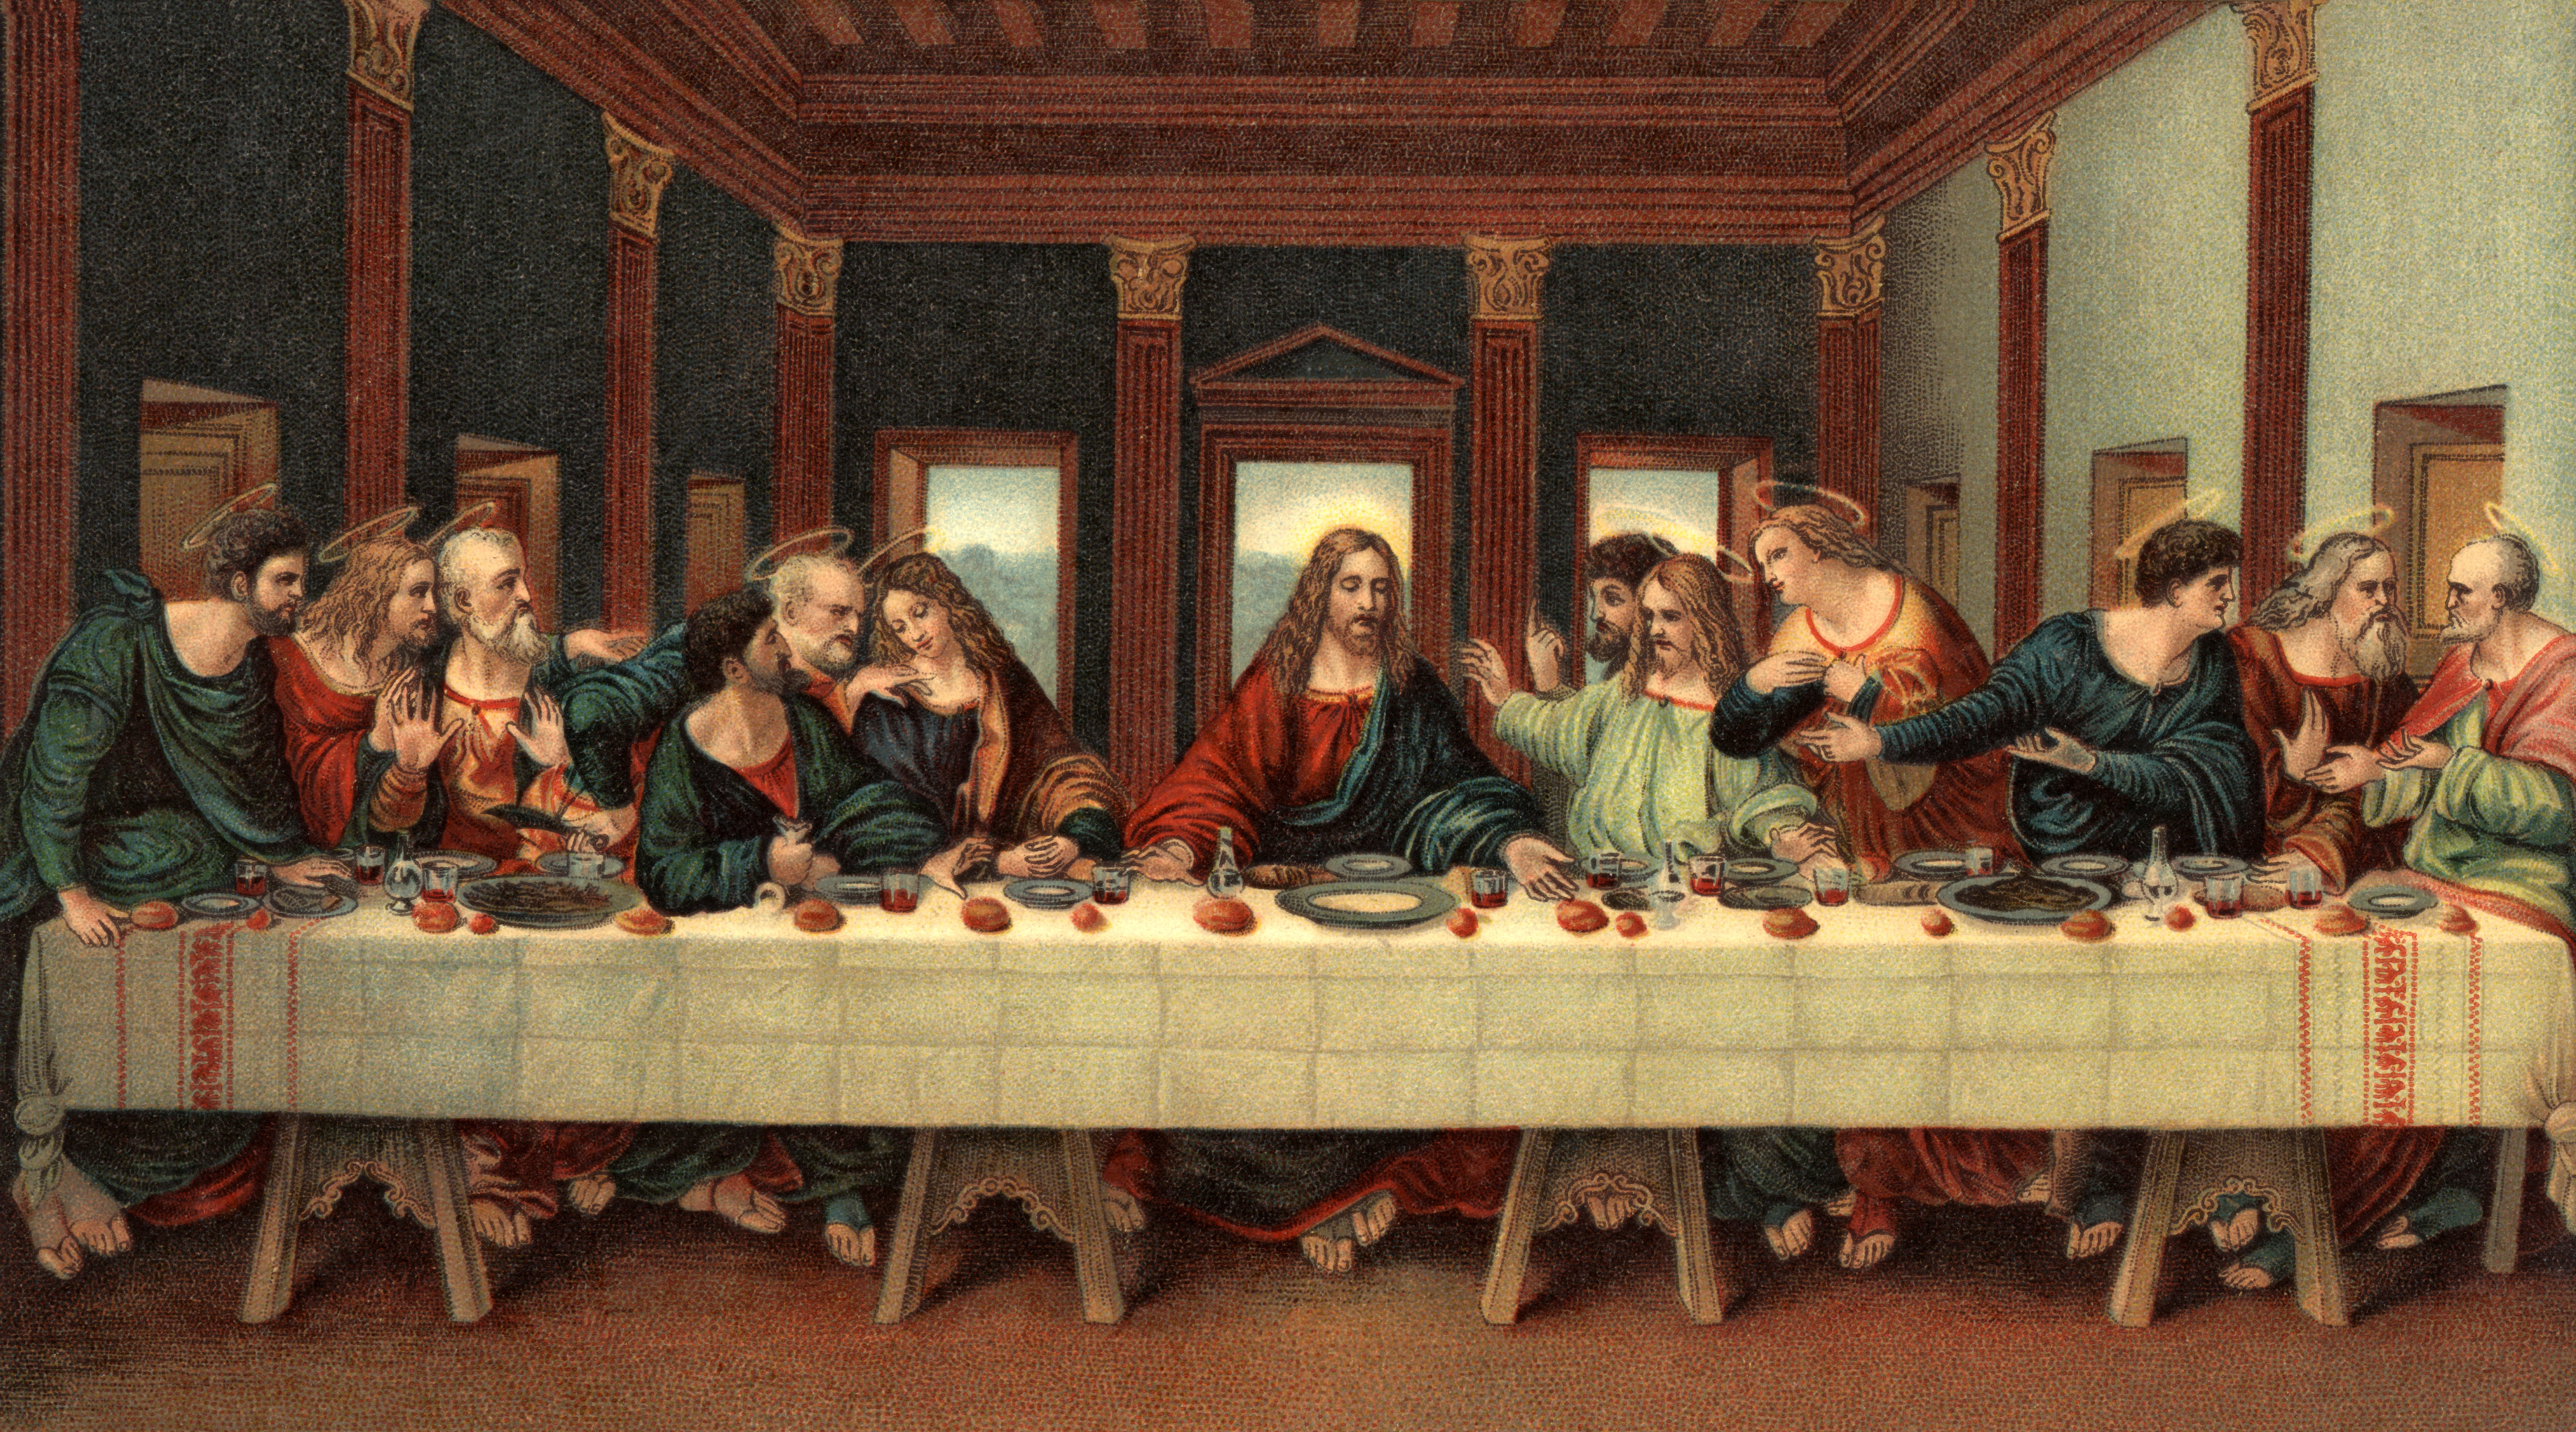 You Can Examine a Copy of 'The Last Supper' on Google's Arts Platform